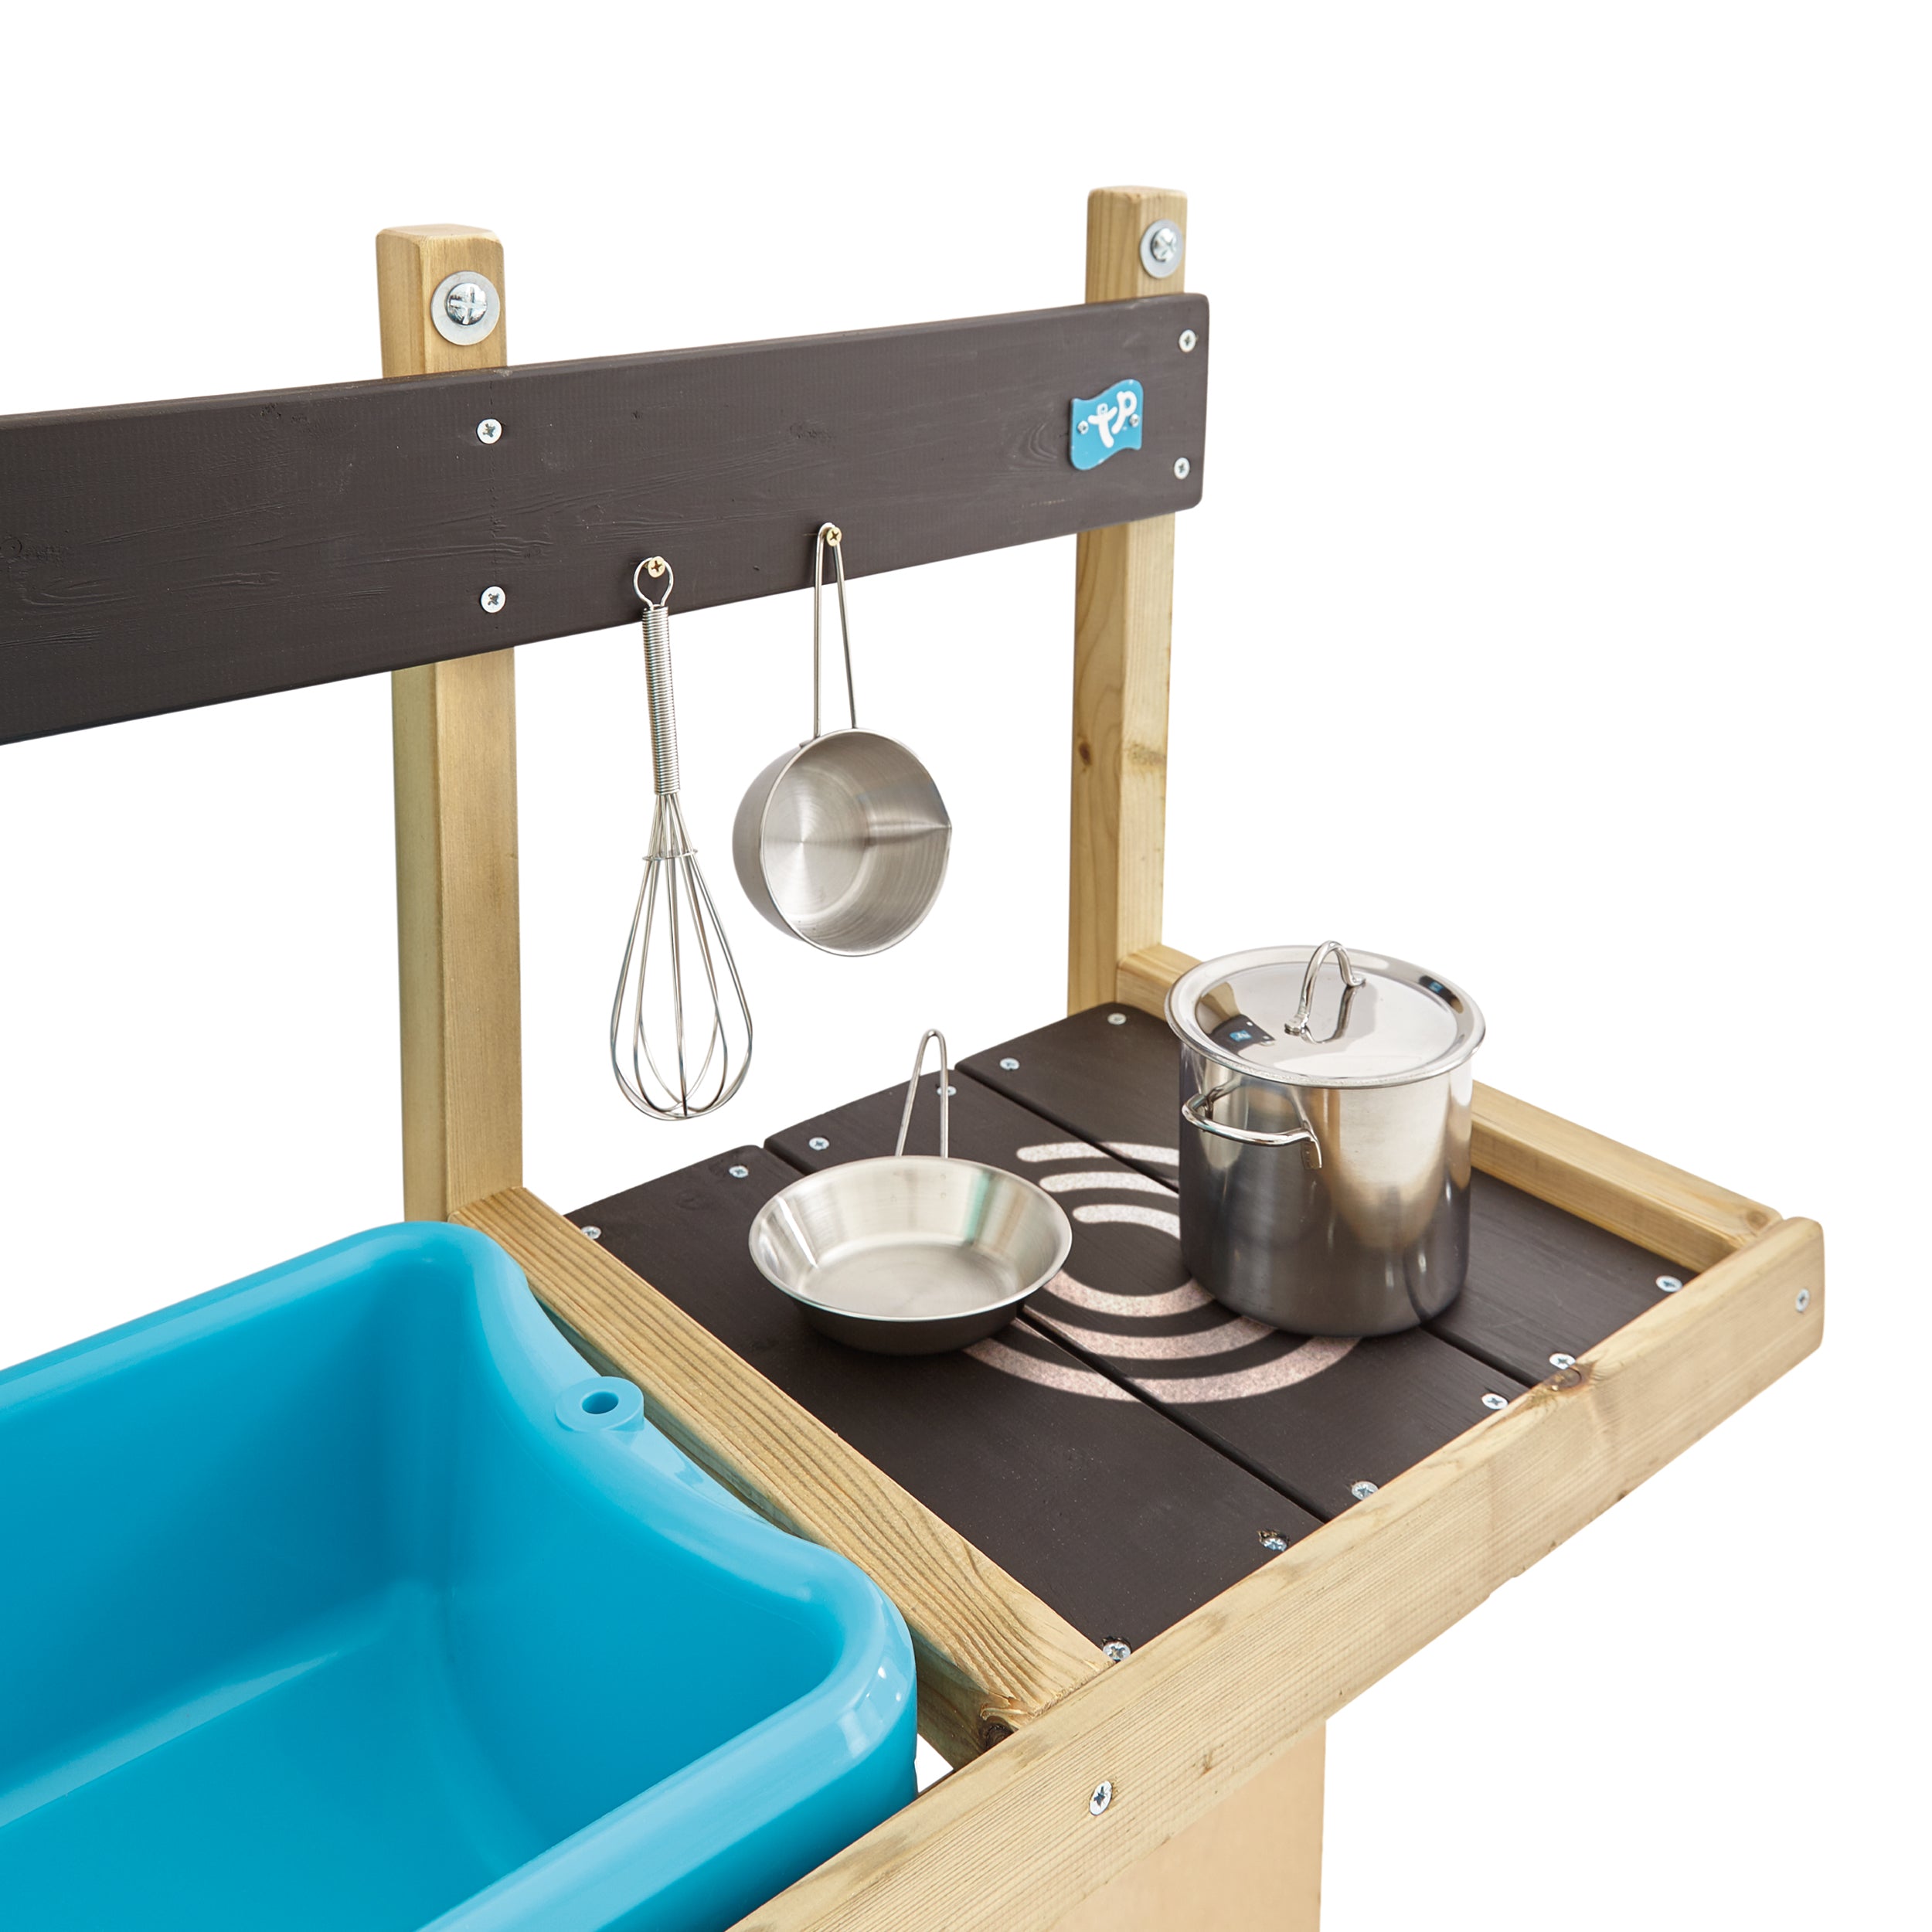 TP297 Deluxe Mud Kitchen Playhouse Accessory